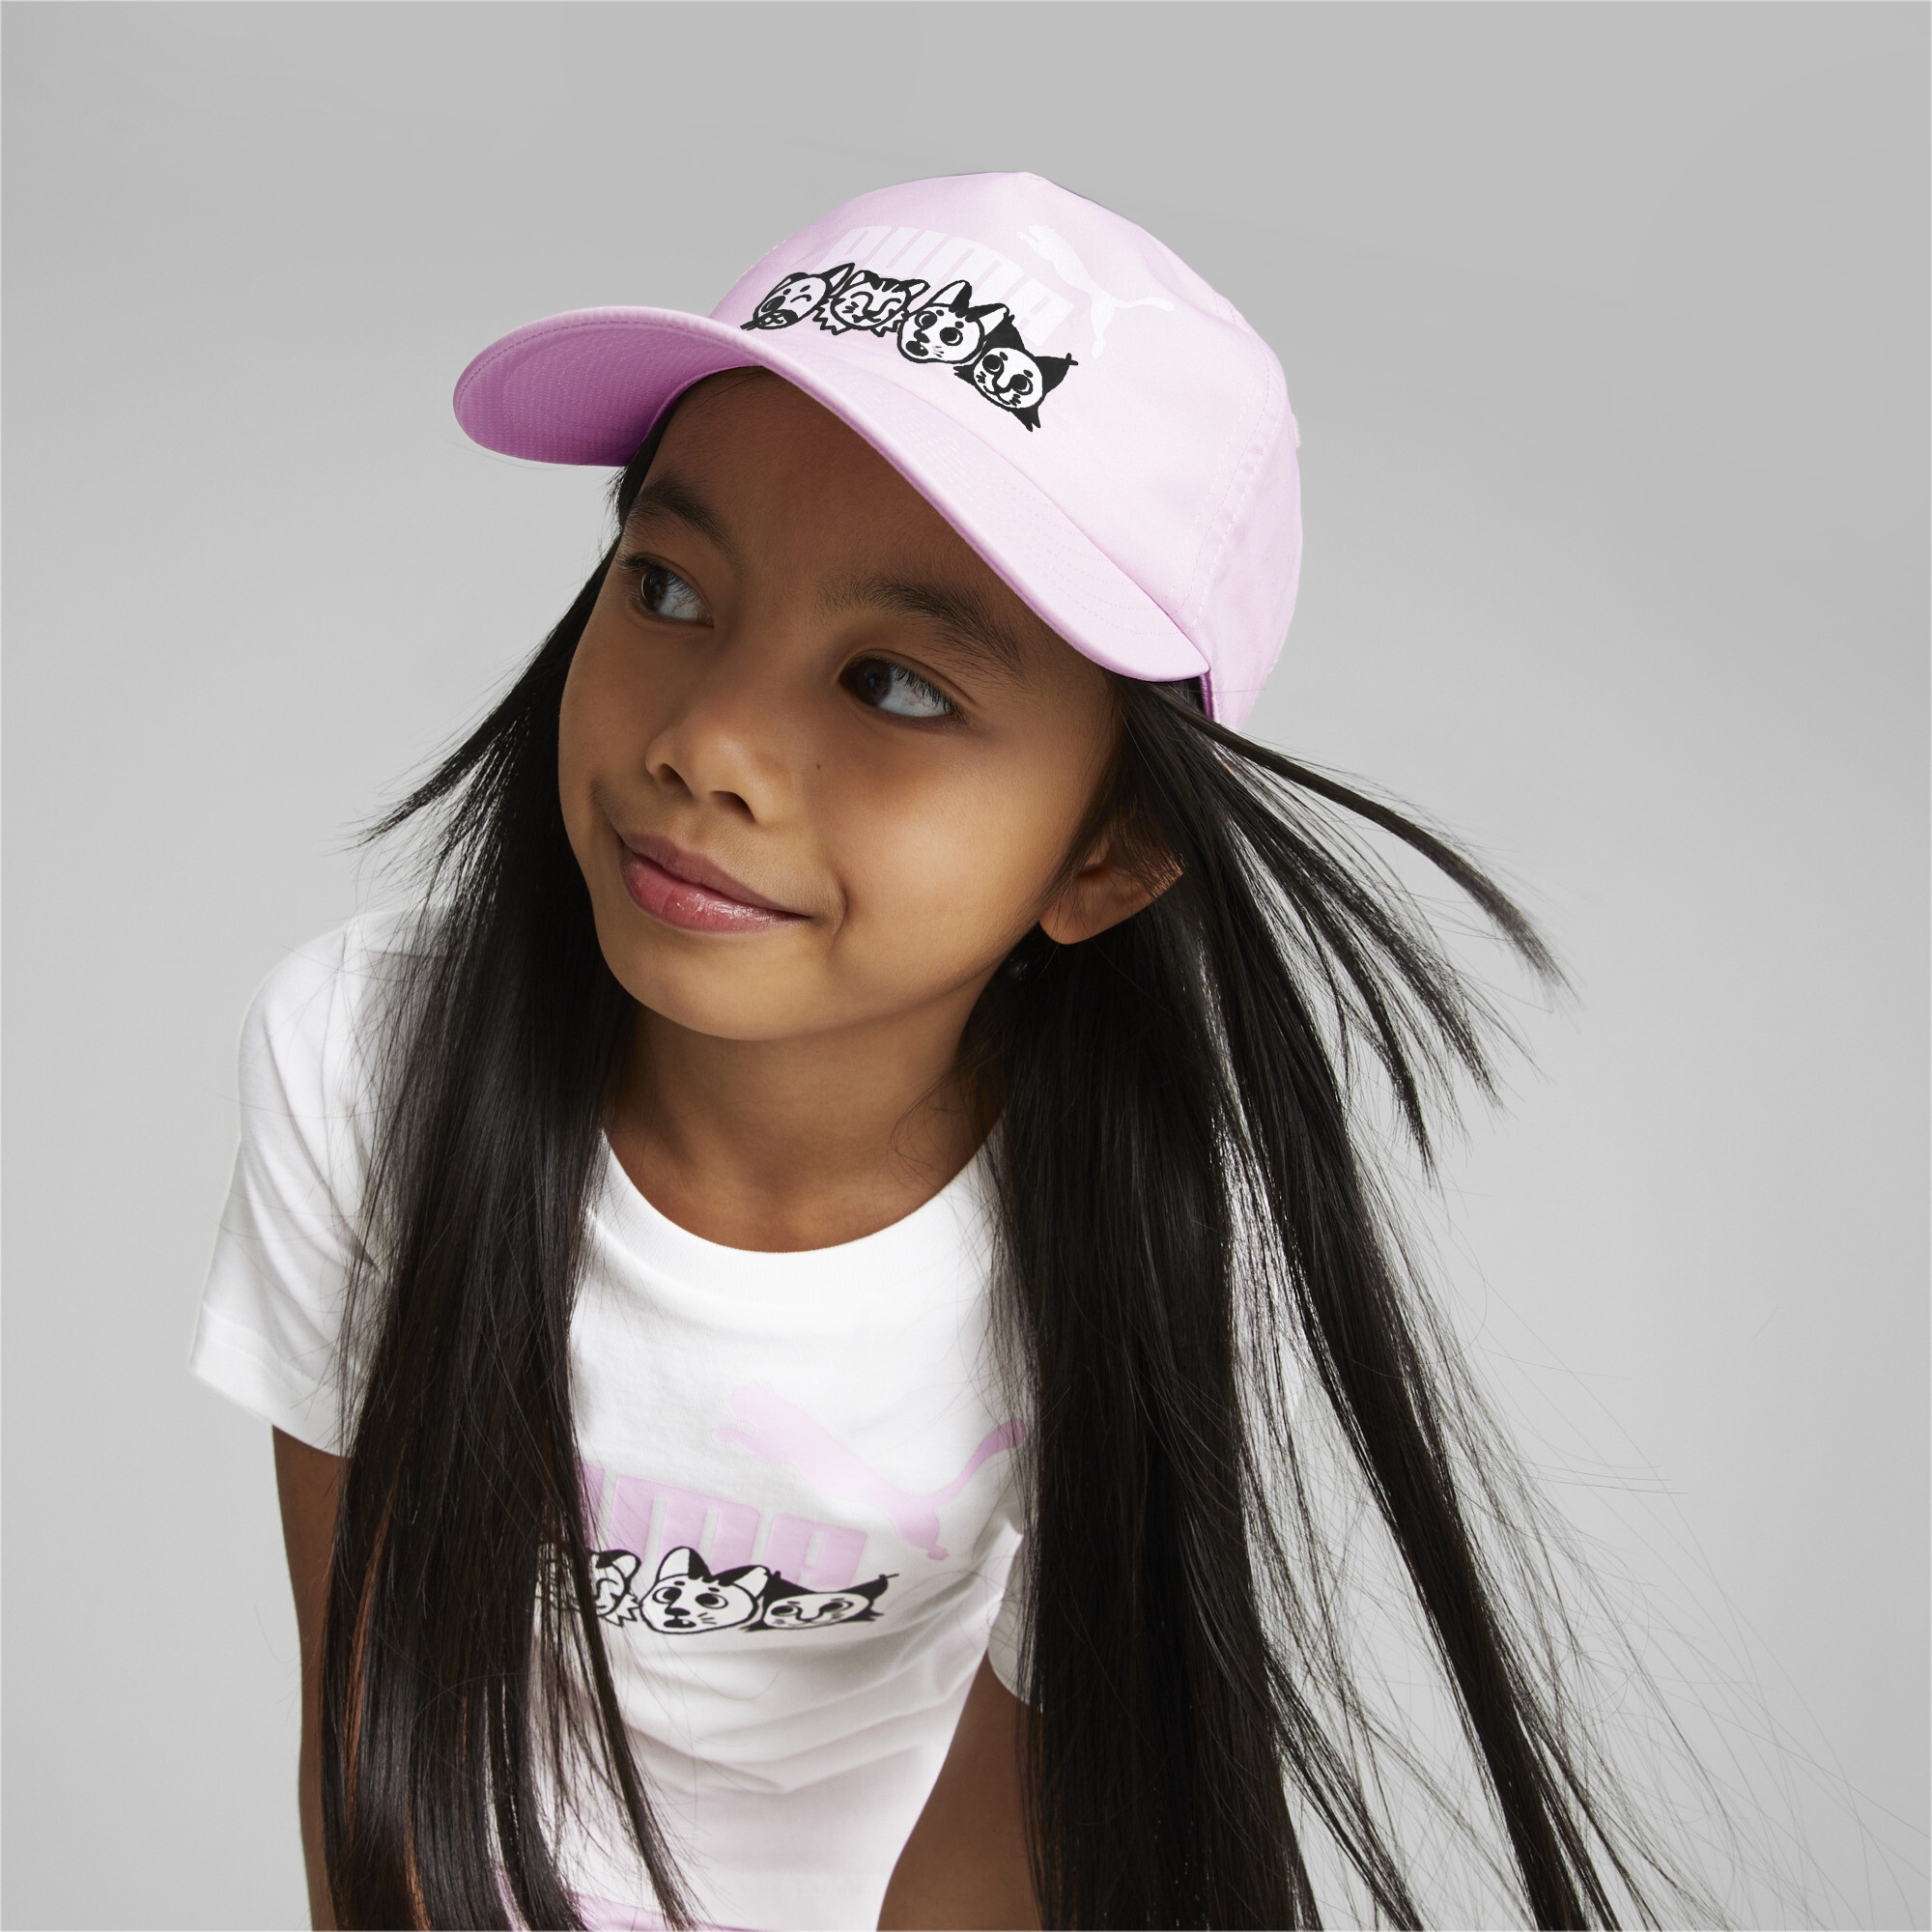 PUMA MATES Cap In Pink, Size Youth